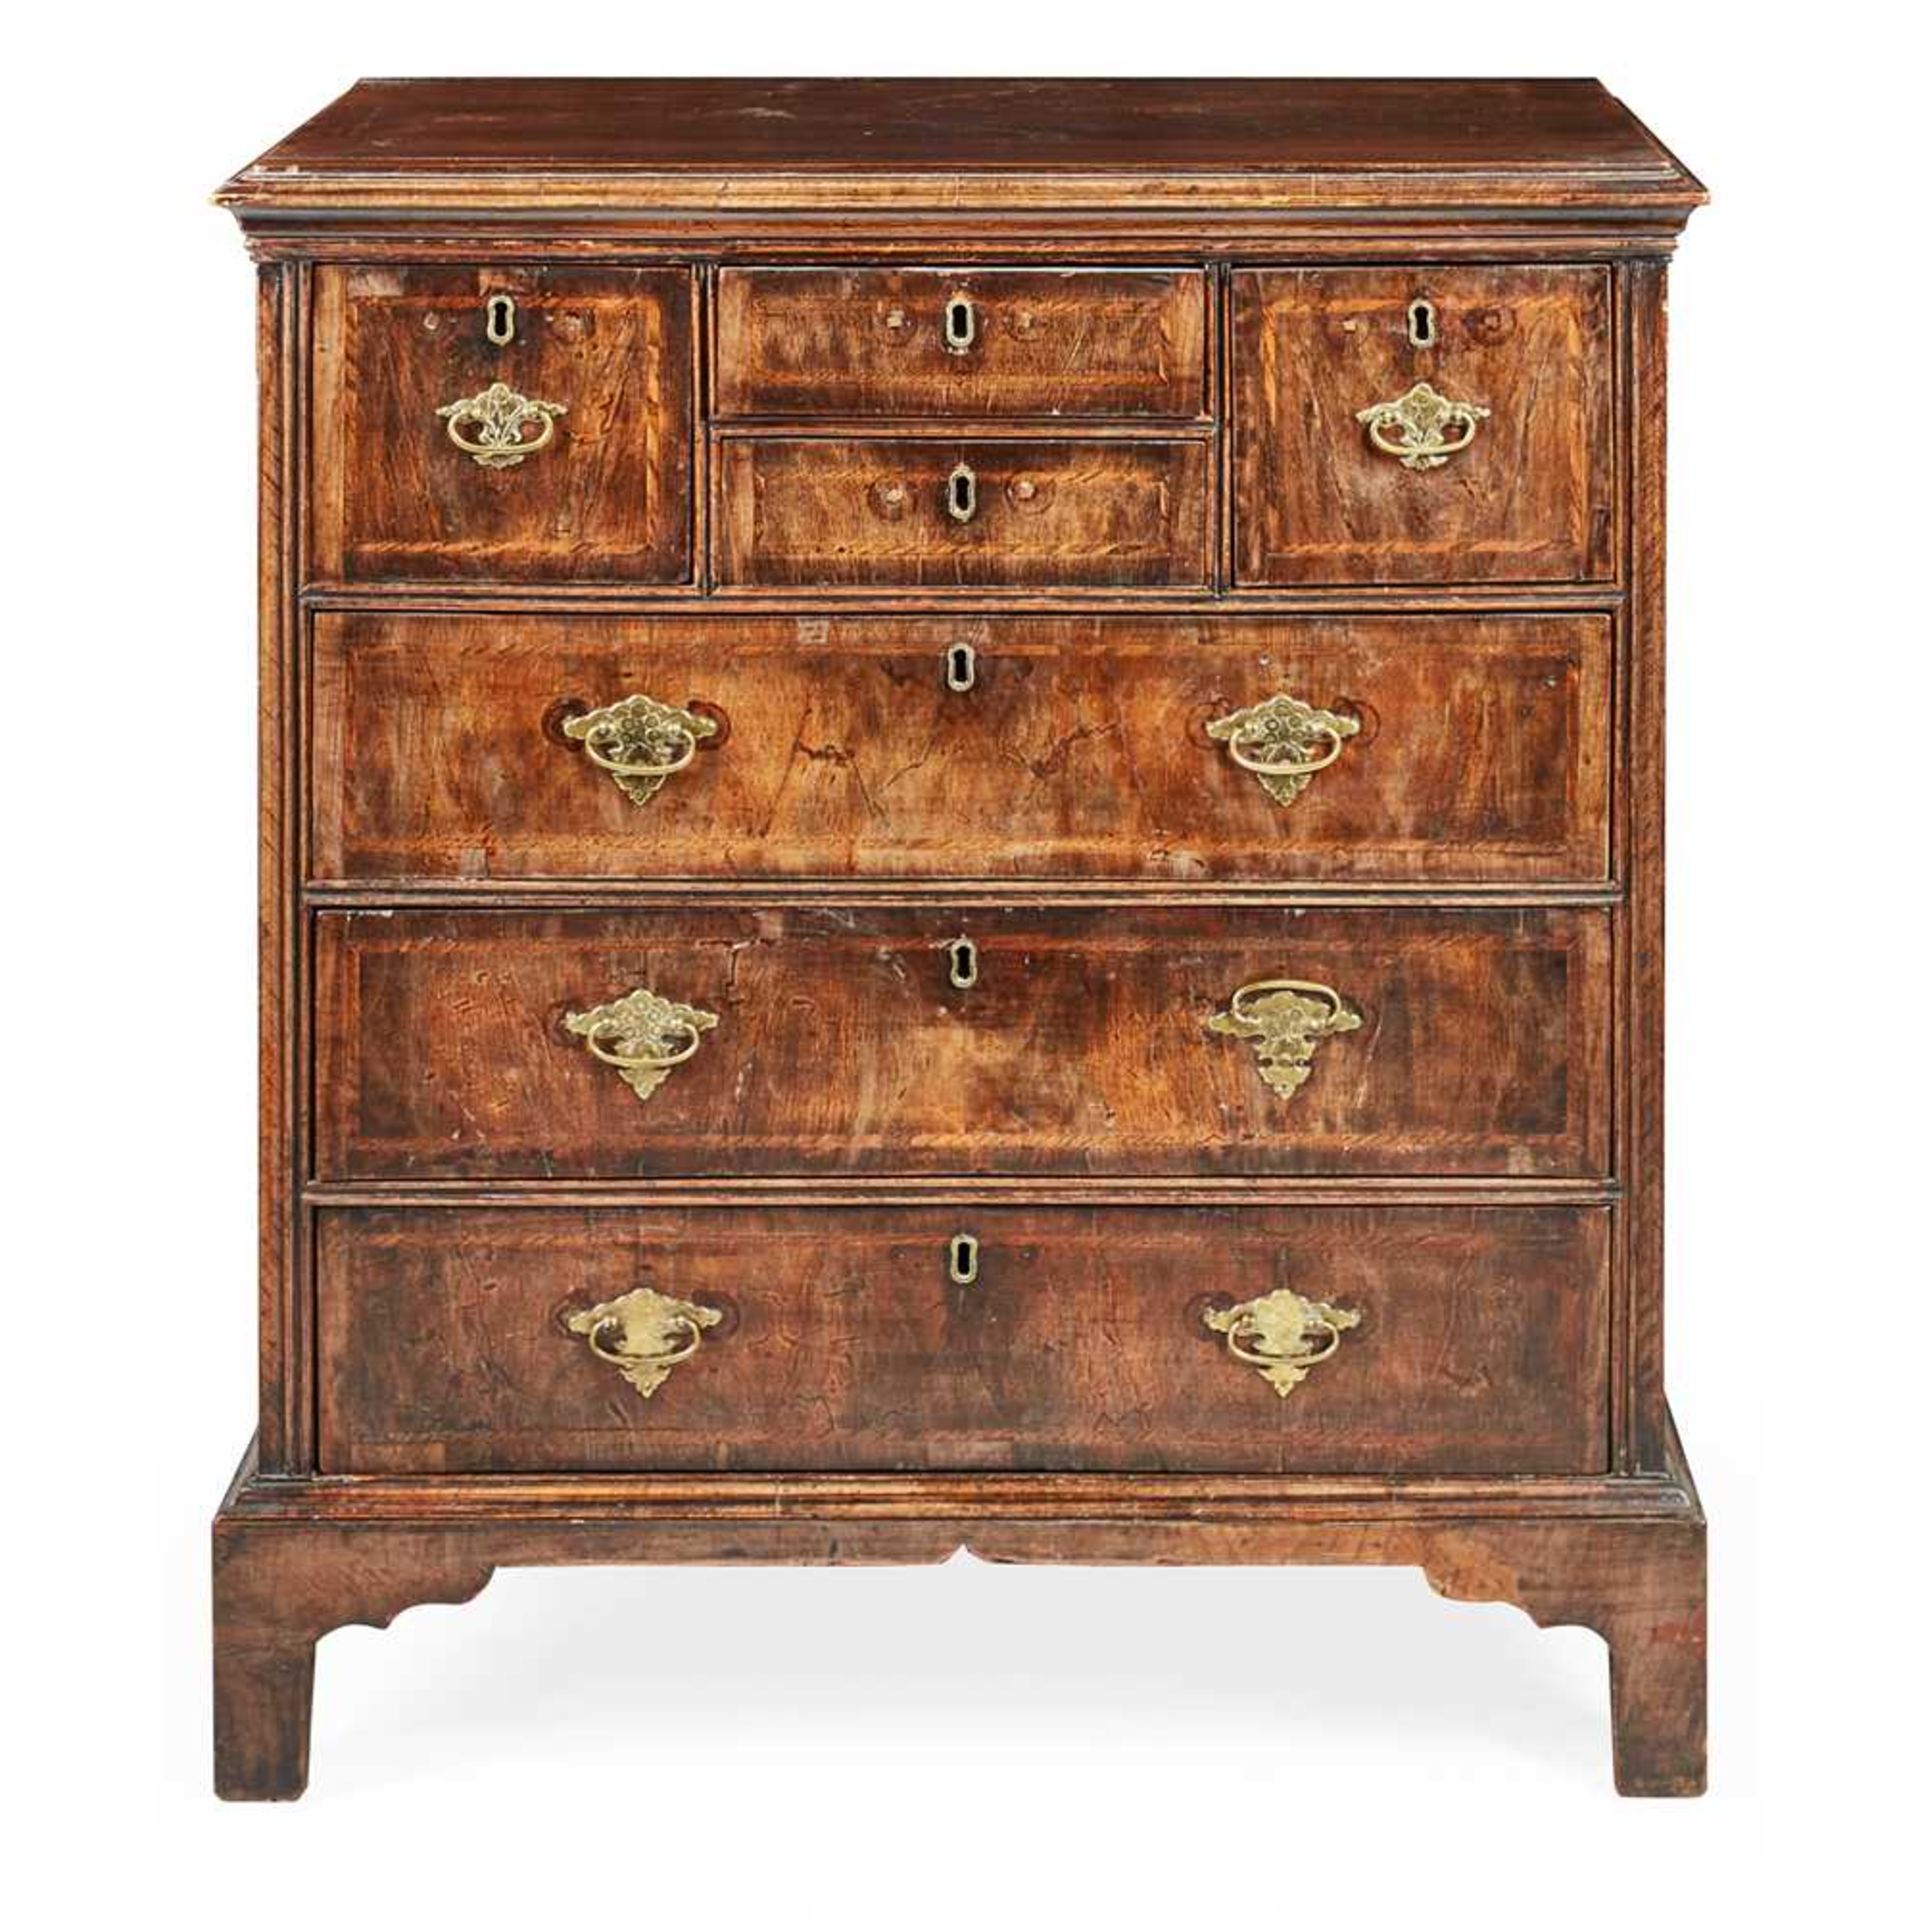 GEORGE II WALNUT AND FEATHER BANDED CHEST OF DRAWERS MID 18TH CENTURY